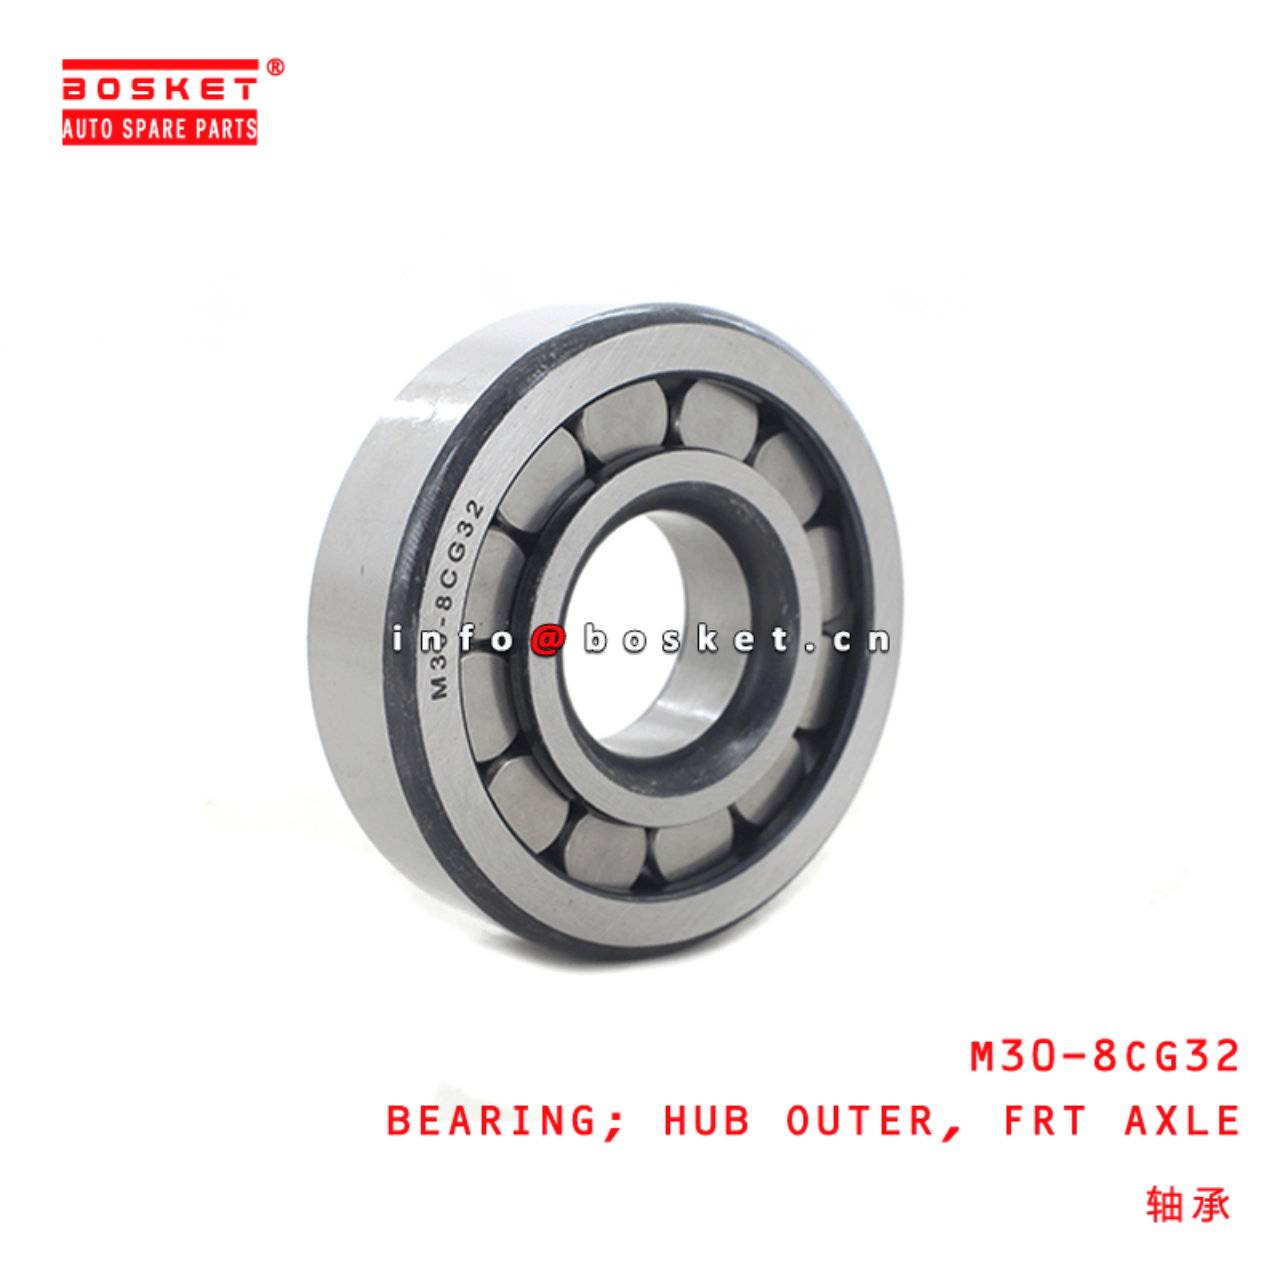  M30-8CG32 Front Axle Hub Outer Bearing Suitable For MITSUBISHI FUSO